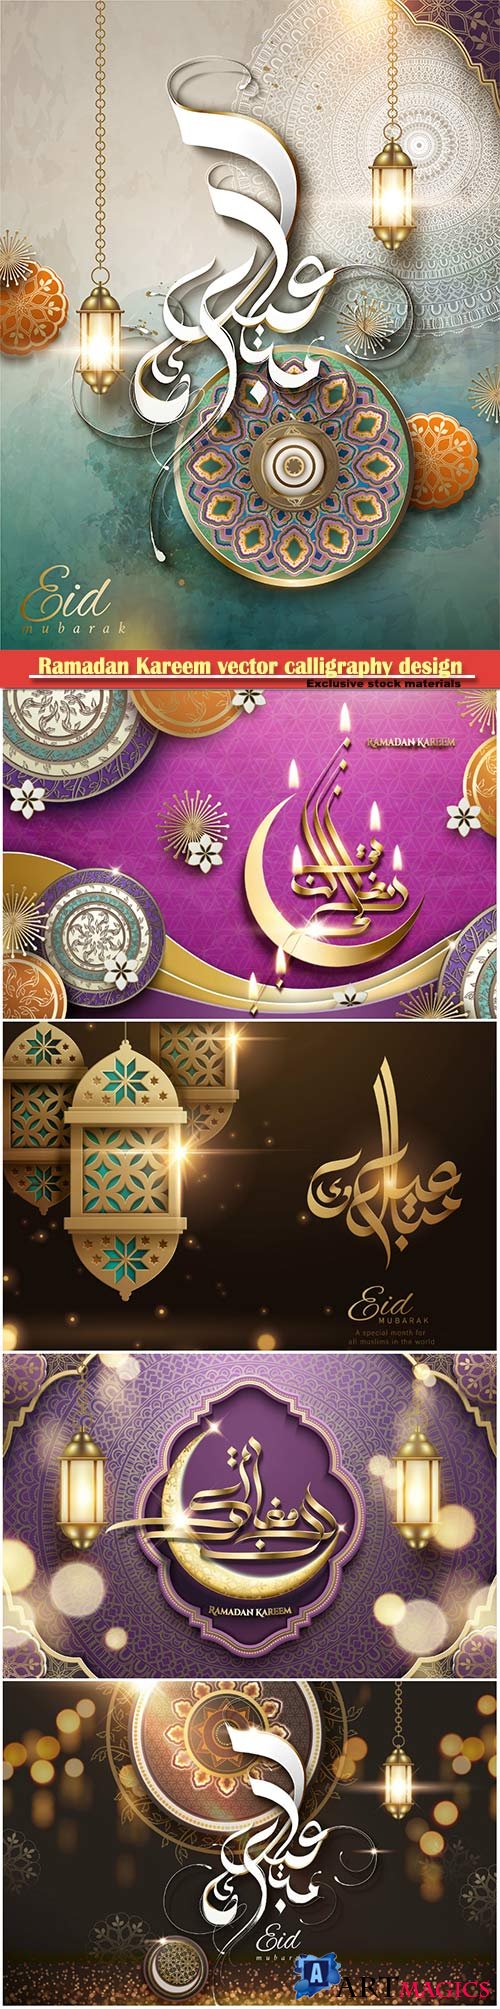 Ramadan Kareem vector calligraphy design with decorative floral pattern, mosque silhouette, crescent and glittering islamic background # 31